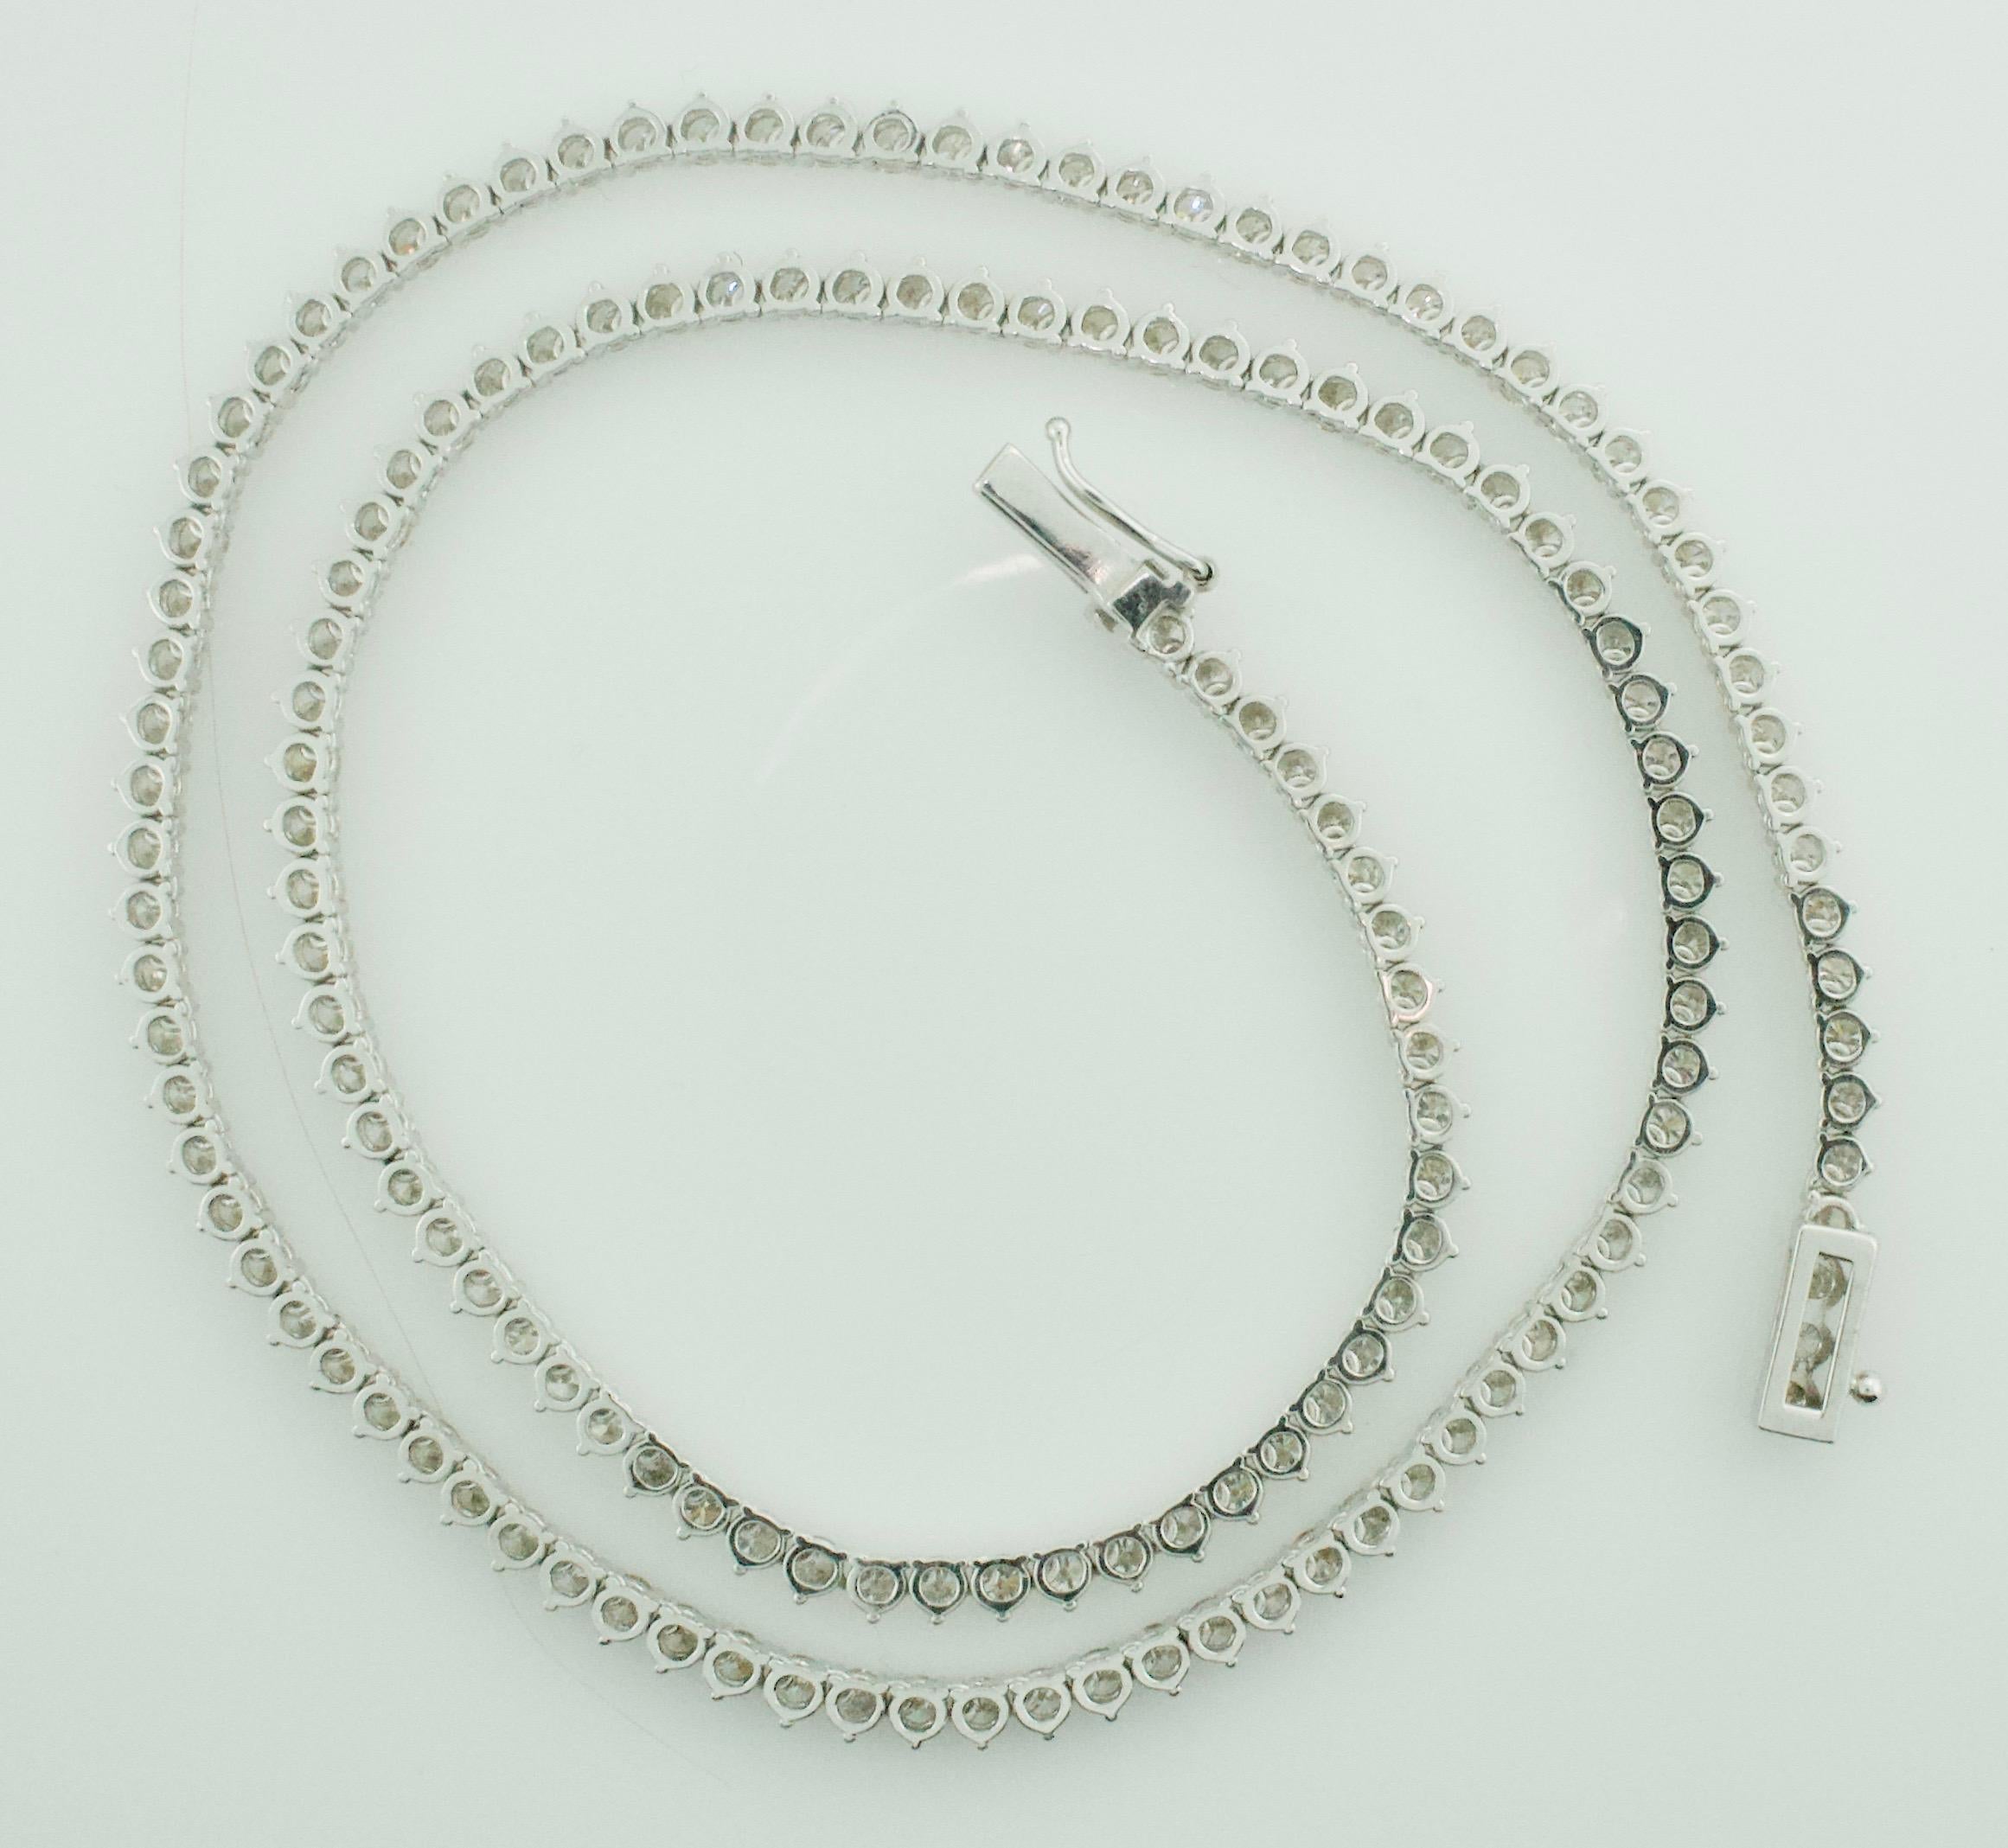 Petite Straight Line Diamond Necklace in White Gold
Welcome to our exquisite Petite Straight Line Diamond Necklace in White Gold, a stunning piece that exudes luxury and sophistication. This necklace features a total of 159 round brilliant cut